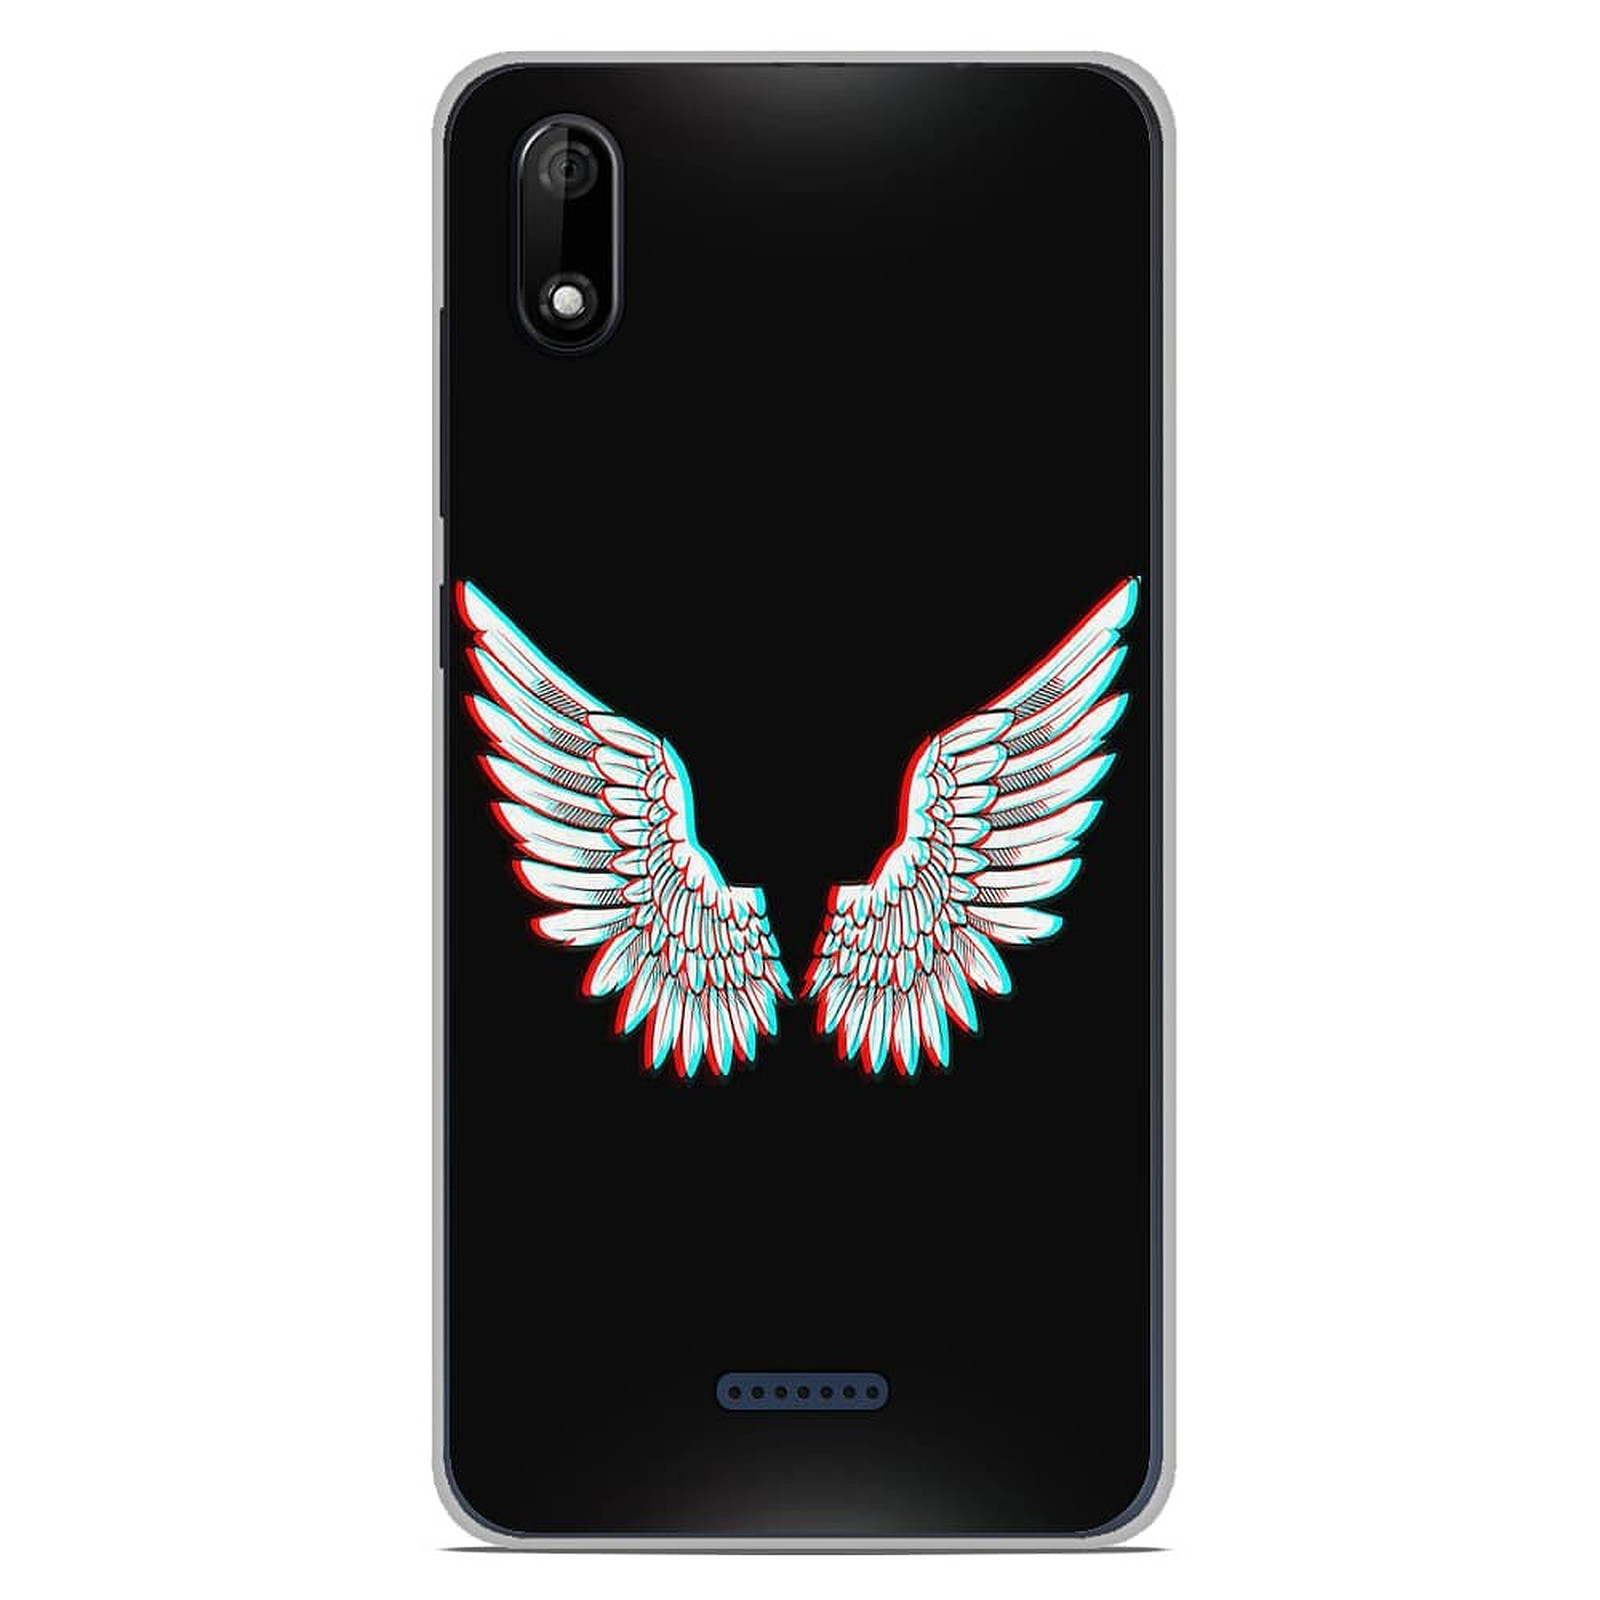 1001 Coques Coque silicone gel Wiko Y60 motif Ailes d'Ange - Coque telephone 1001Coques